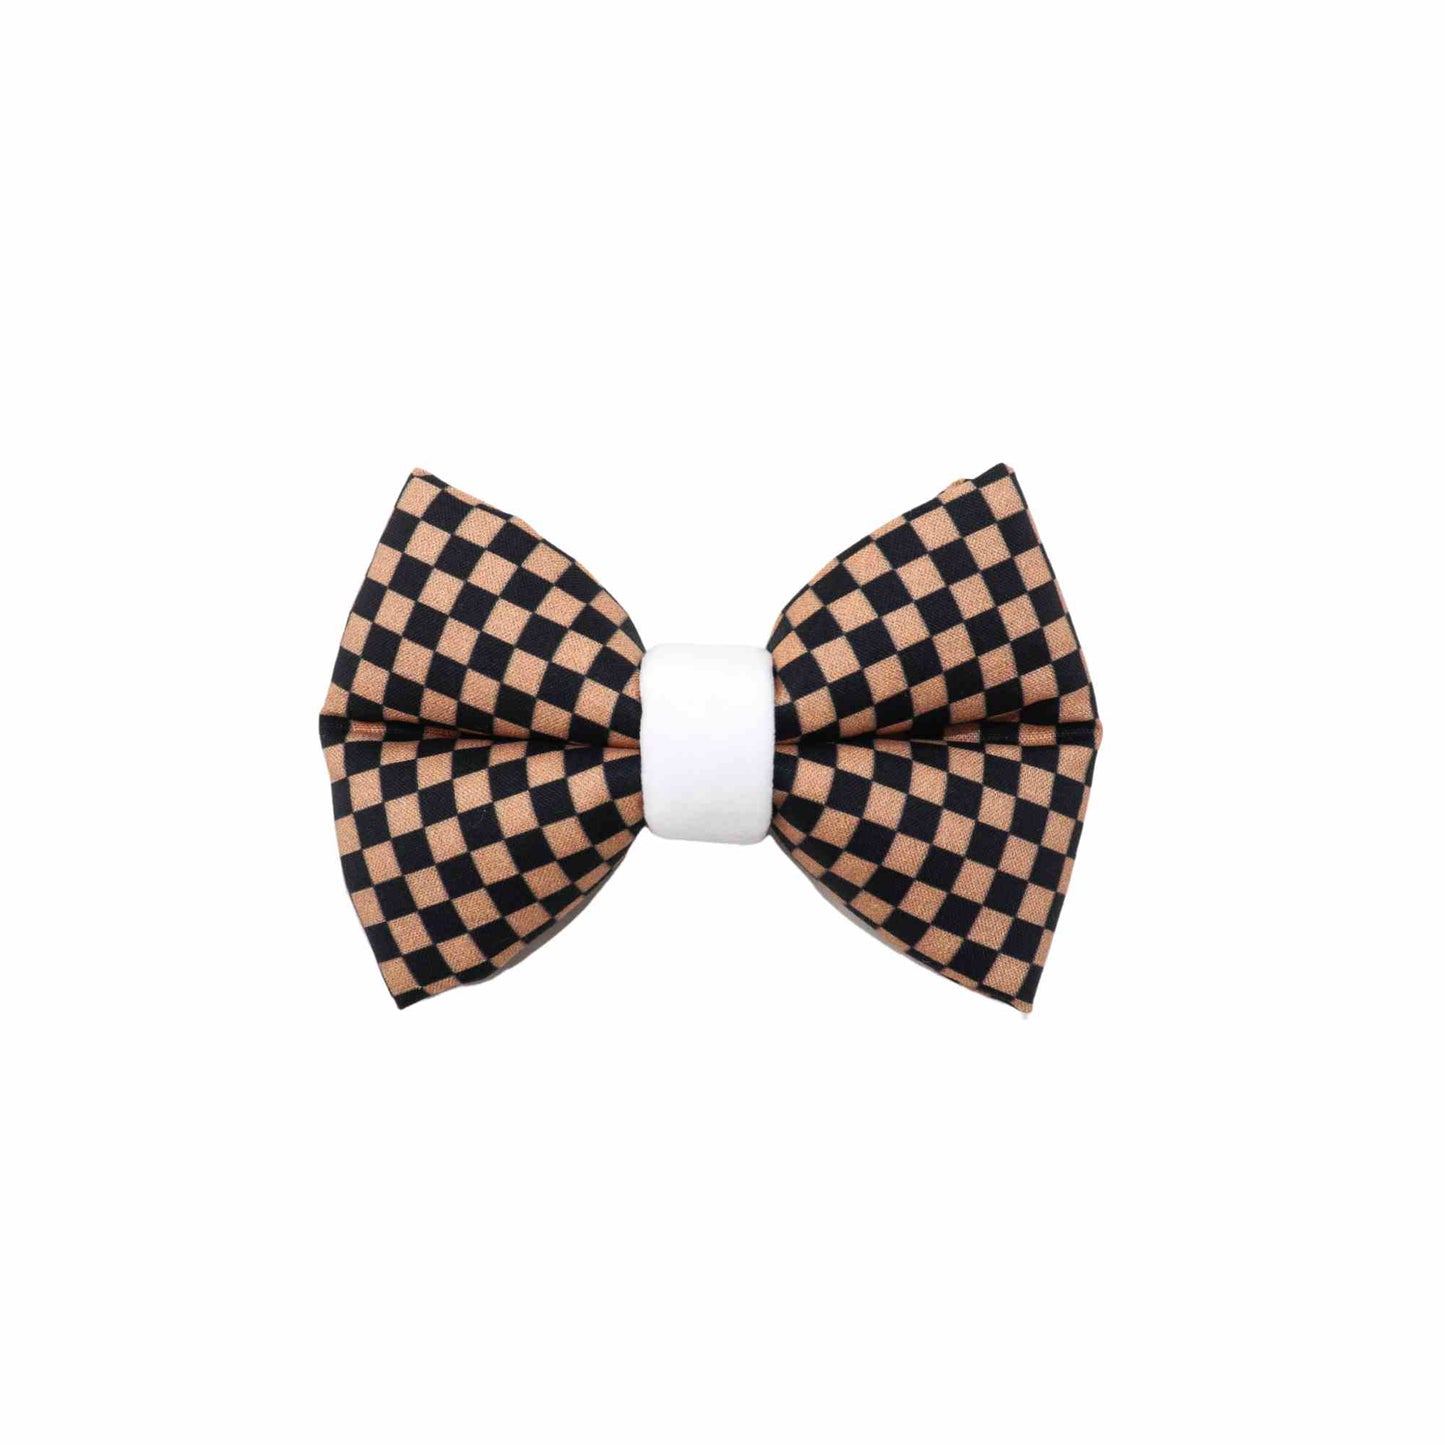 handmade boho brown and black checkered dog bowtie. Designed to be worn over the collar,